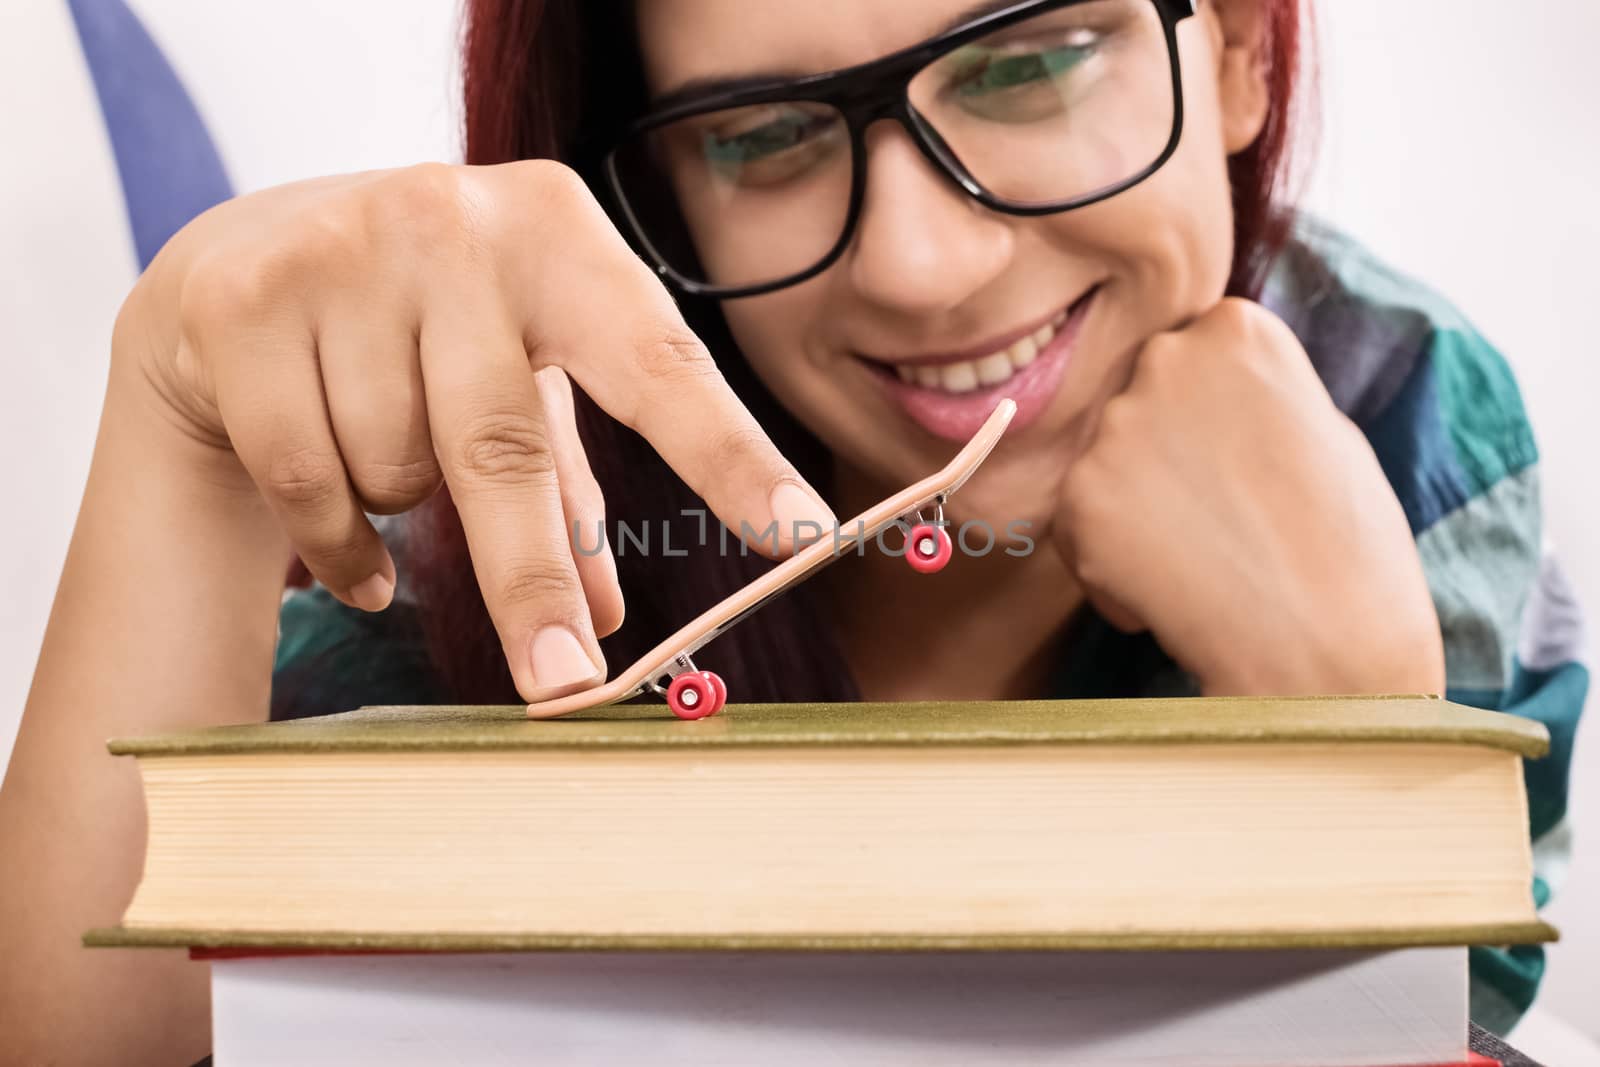 Close-up shot of a smiling young girl lying on a sofa, playing with toy skateboard on a stack of books.